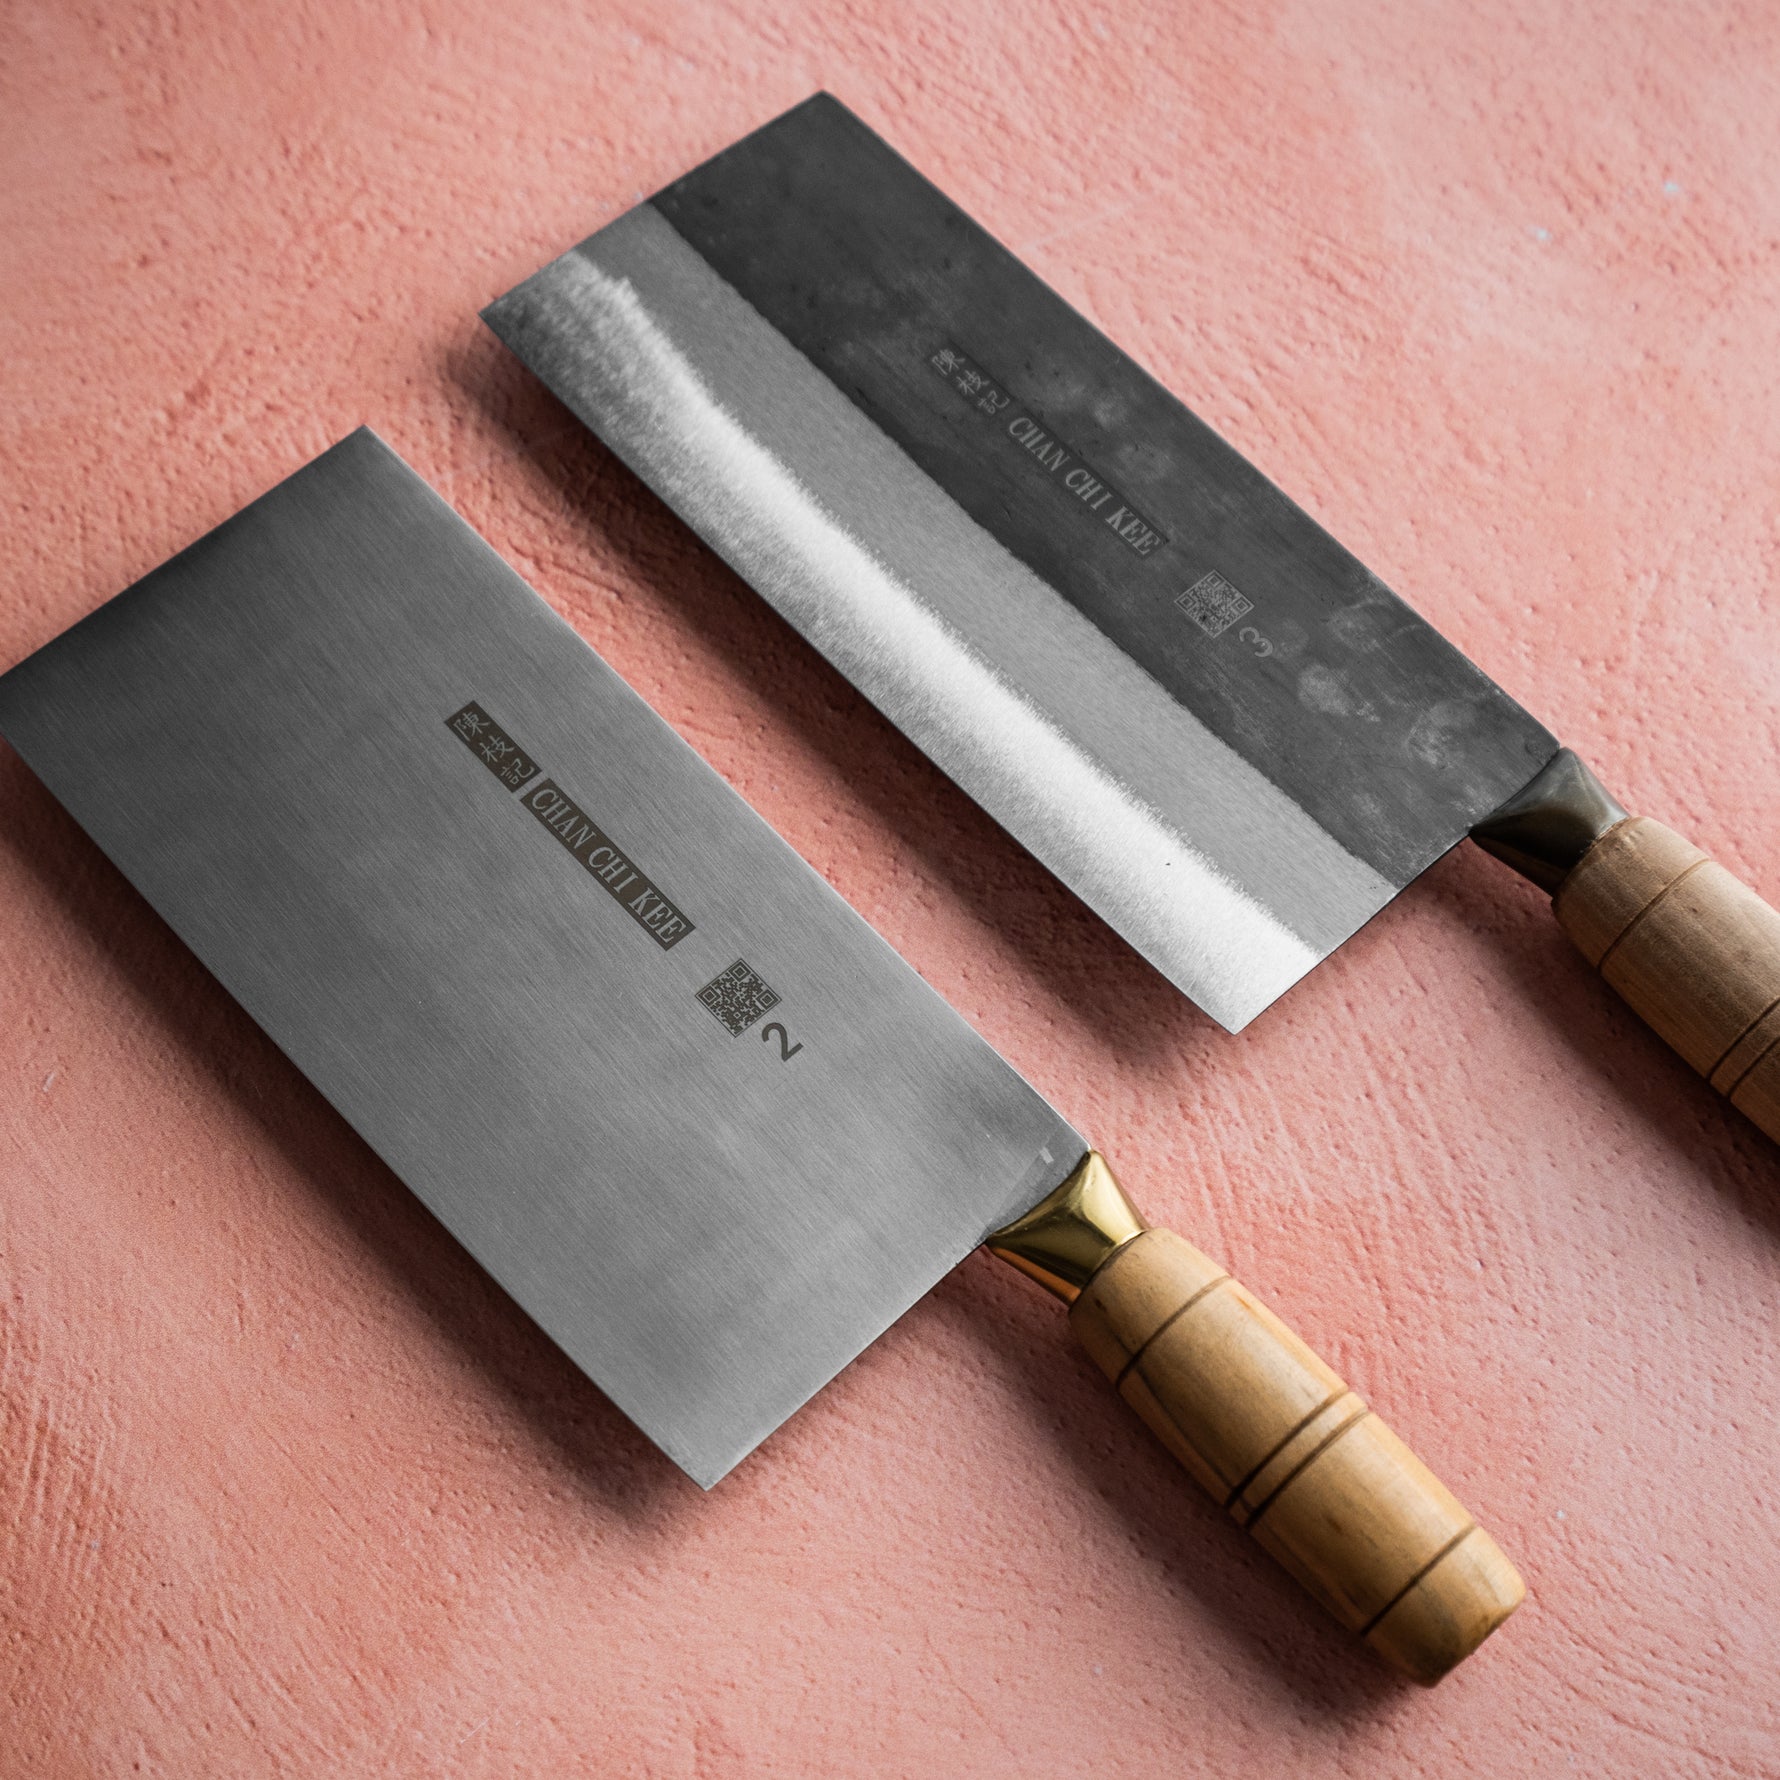 The best knife for cutting vegetables